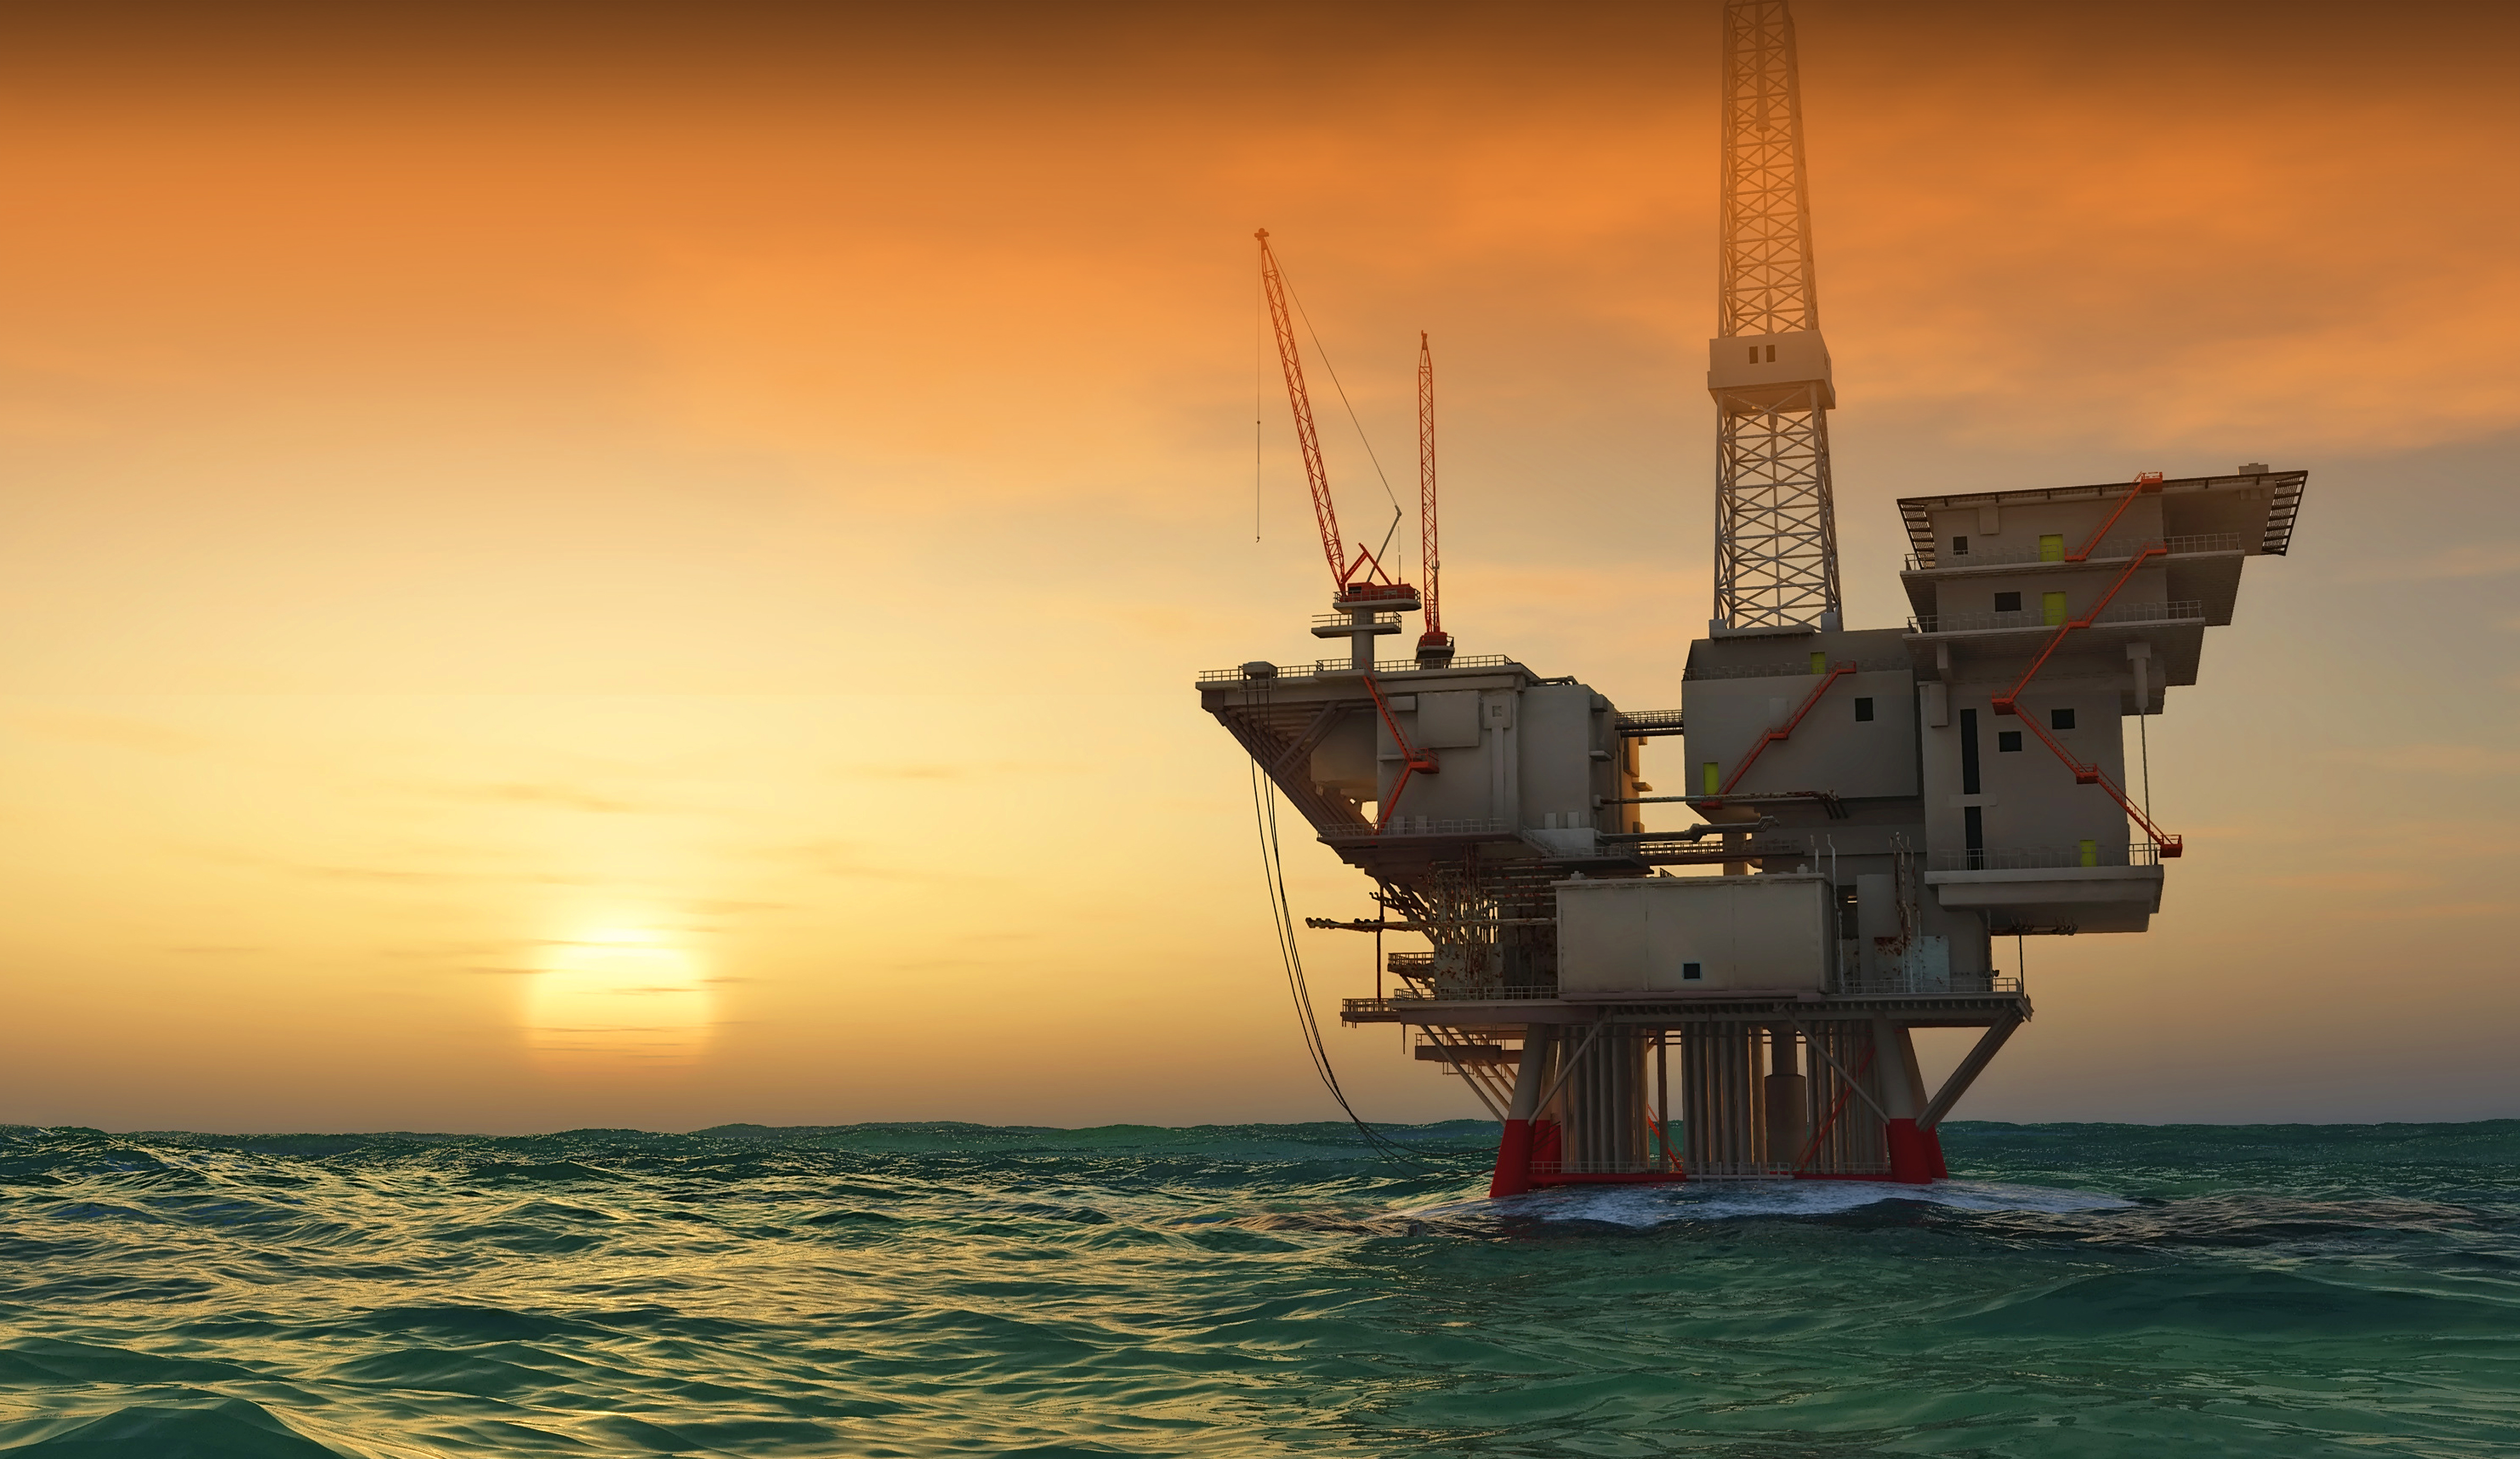 Sunset With Oil Rig